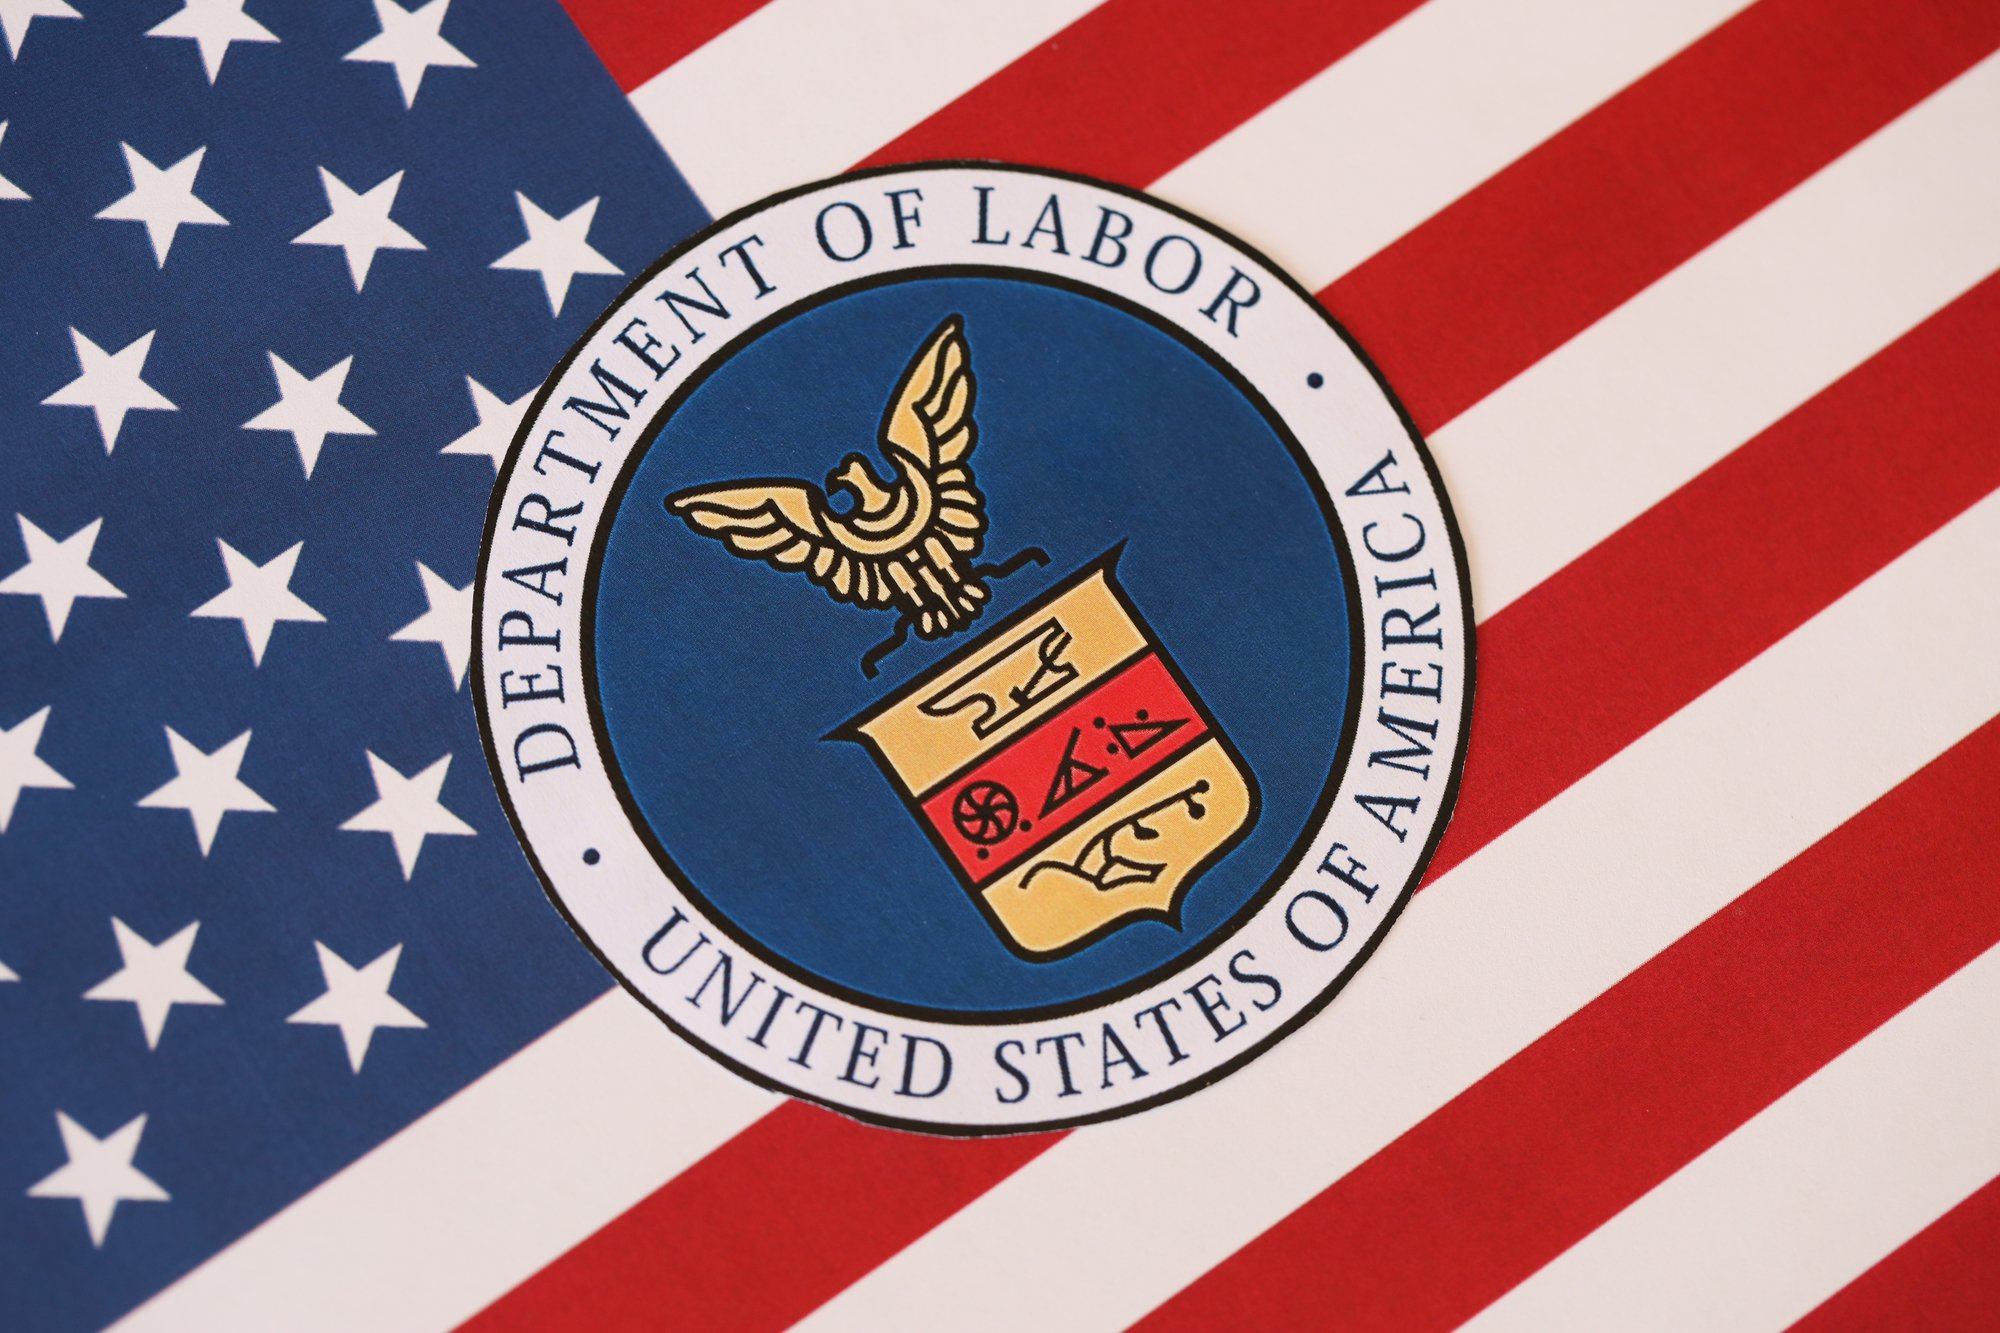 US Department of Labor seal on United States of America flag close up